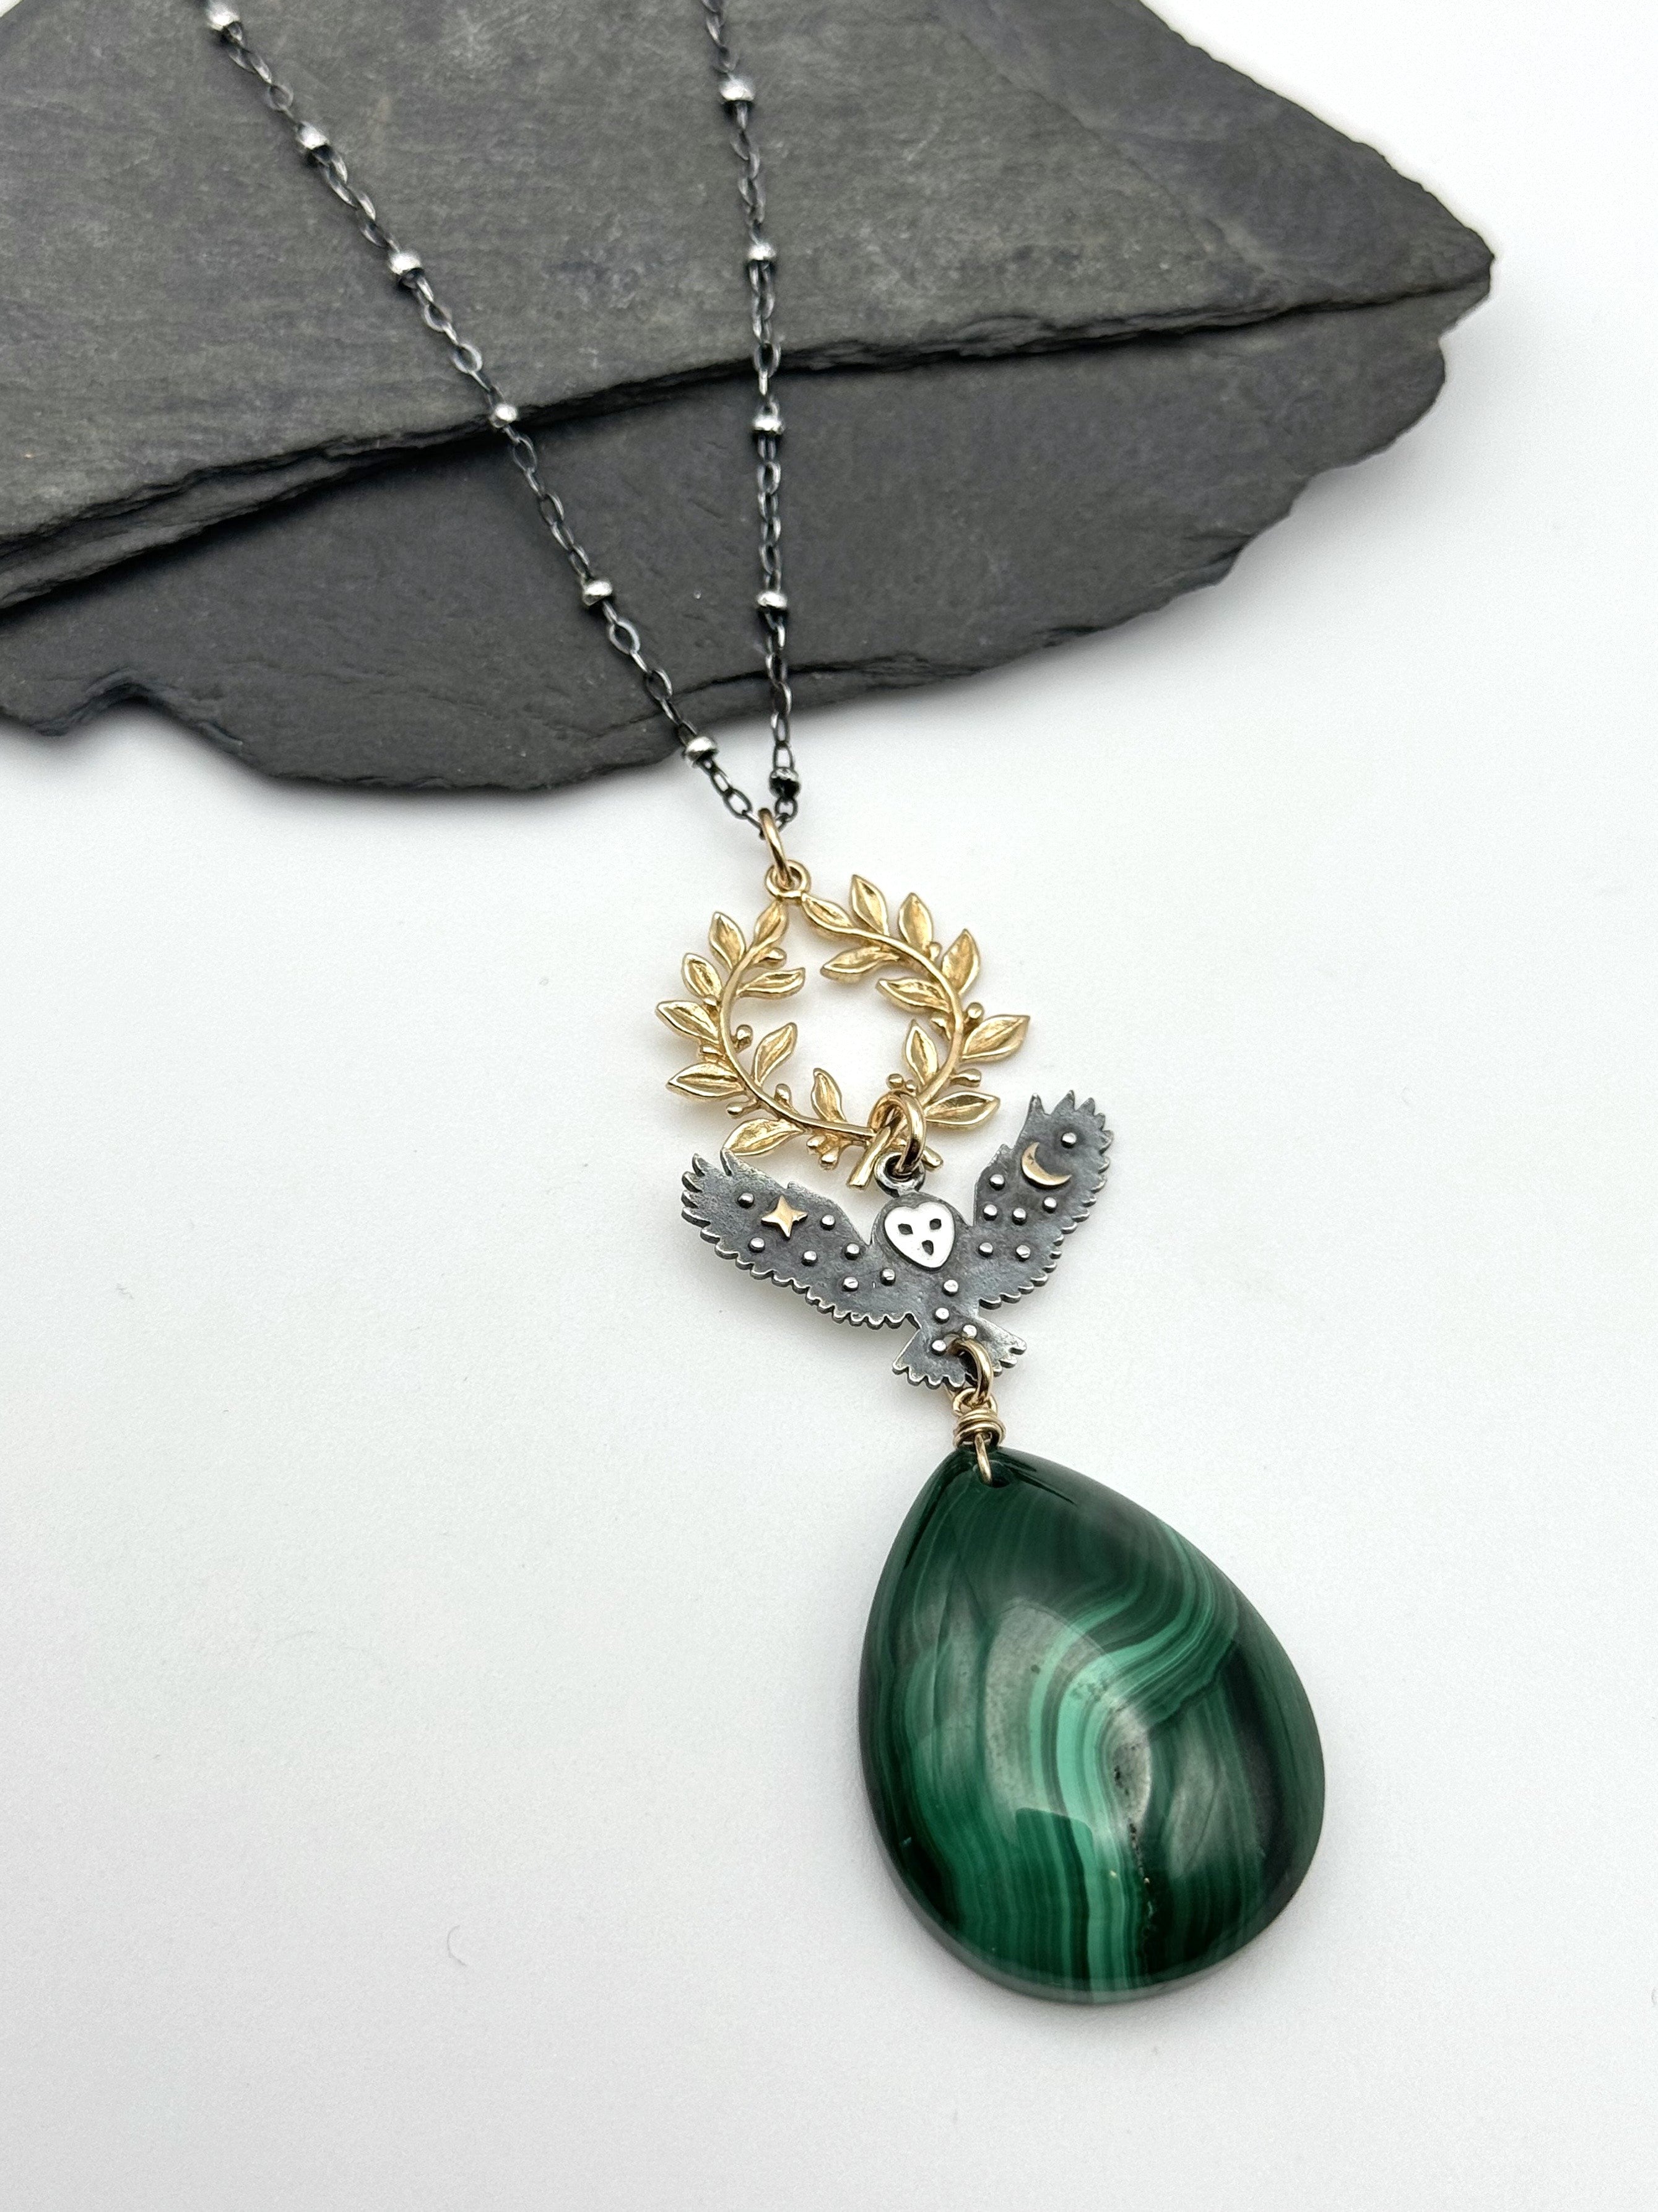 •NOCTURNAL ALCHEMY• malachite + owl + mixed metal necklace (26"-28" long)